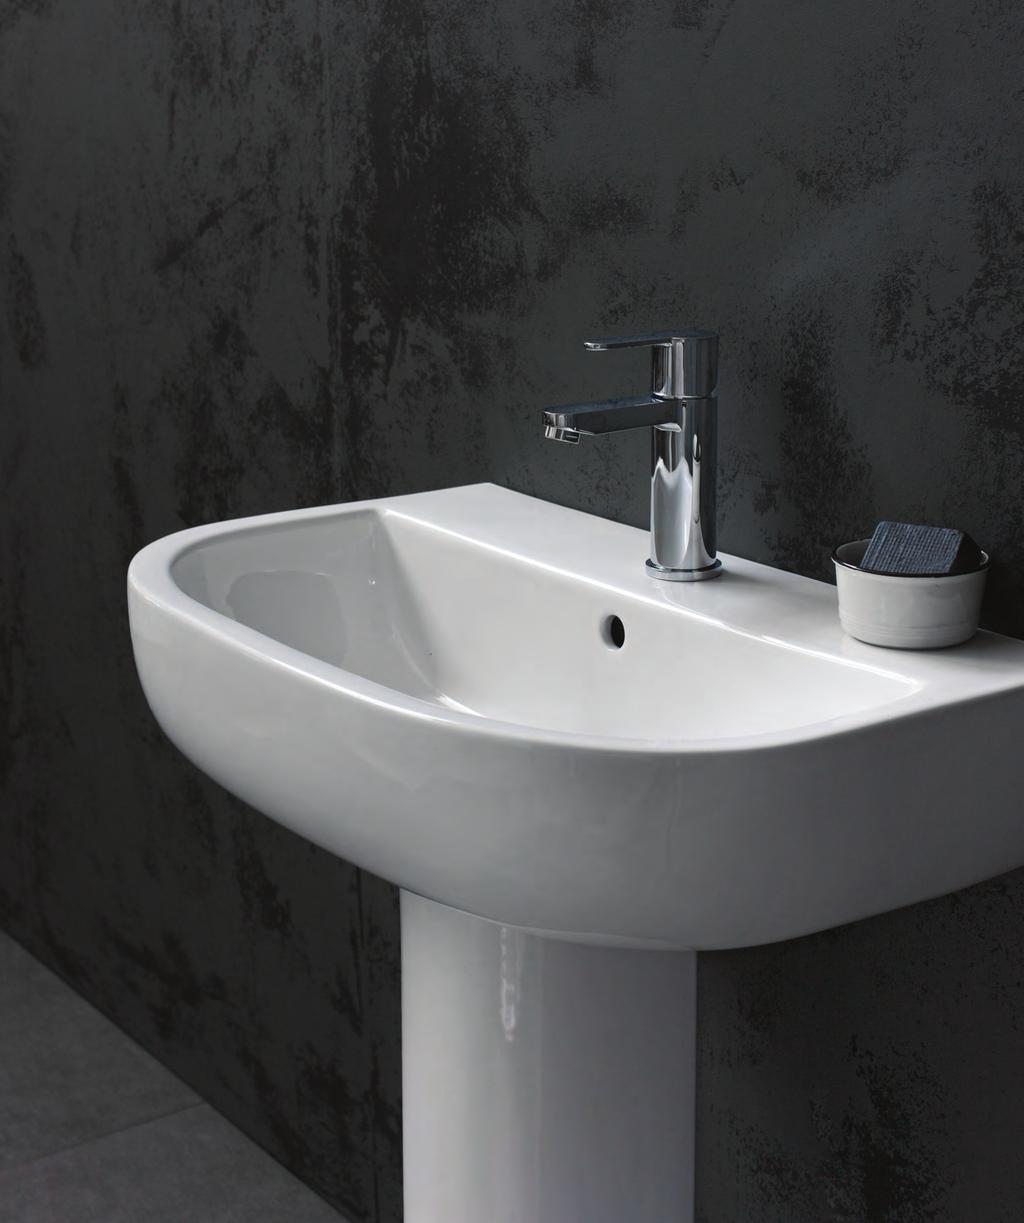 Cleargreen range which also are available in smaller sizes, at just 1500mm.